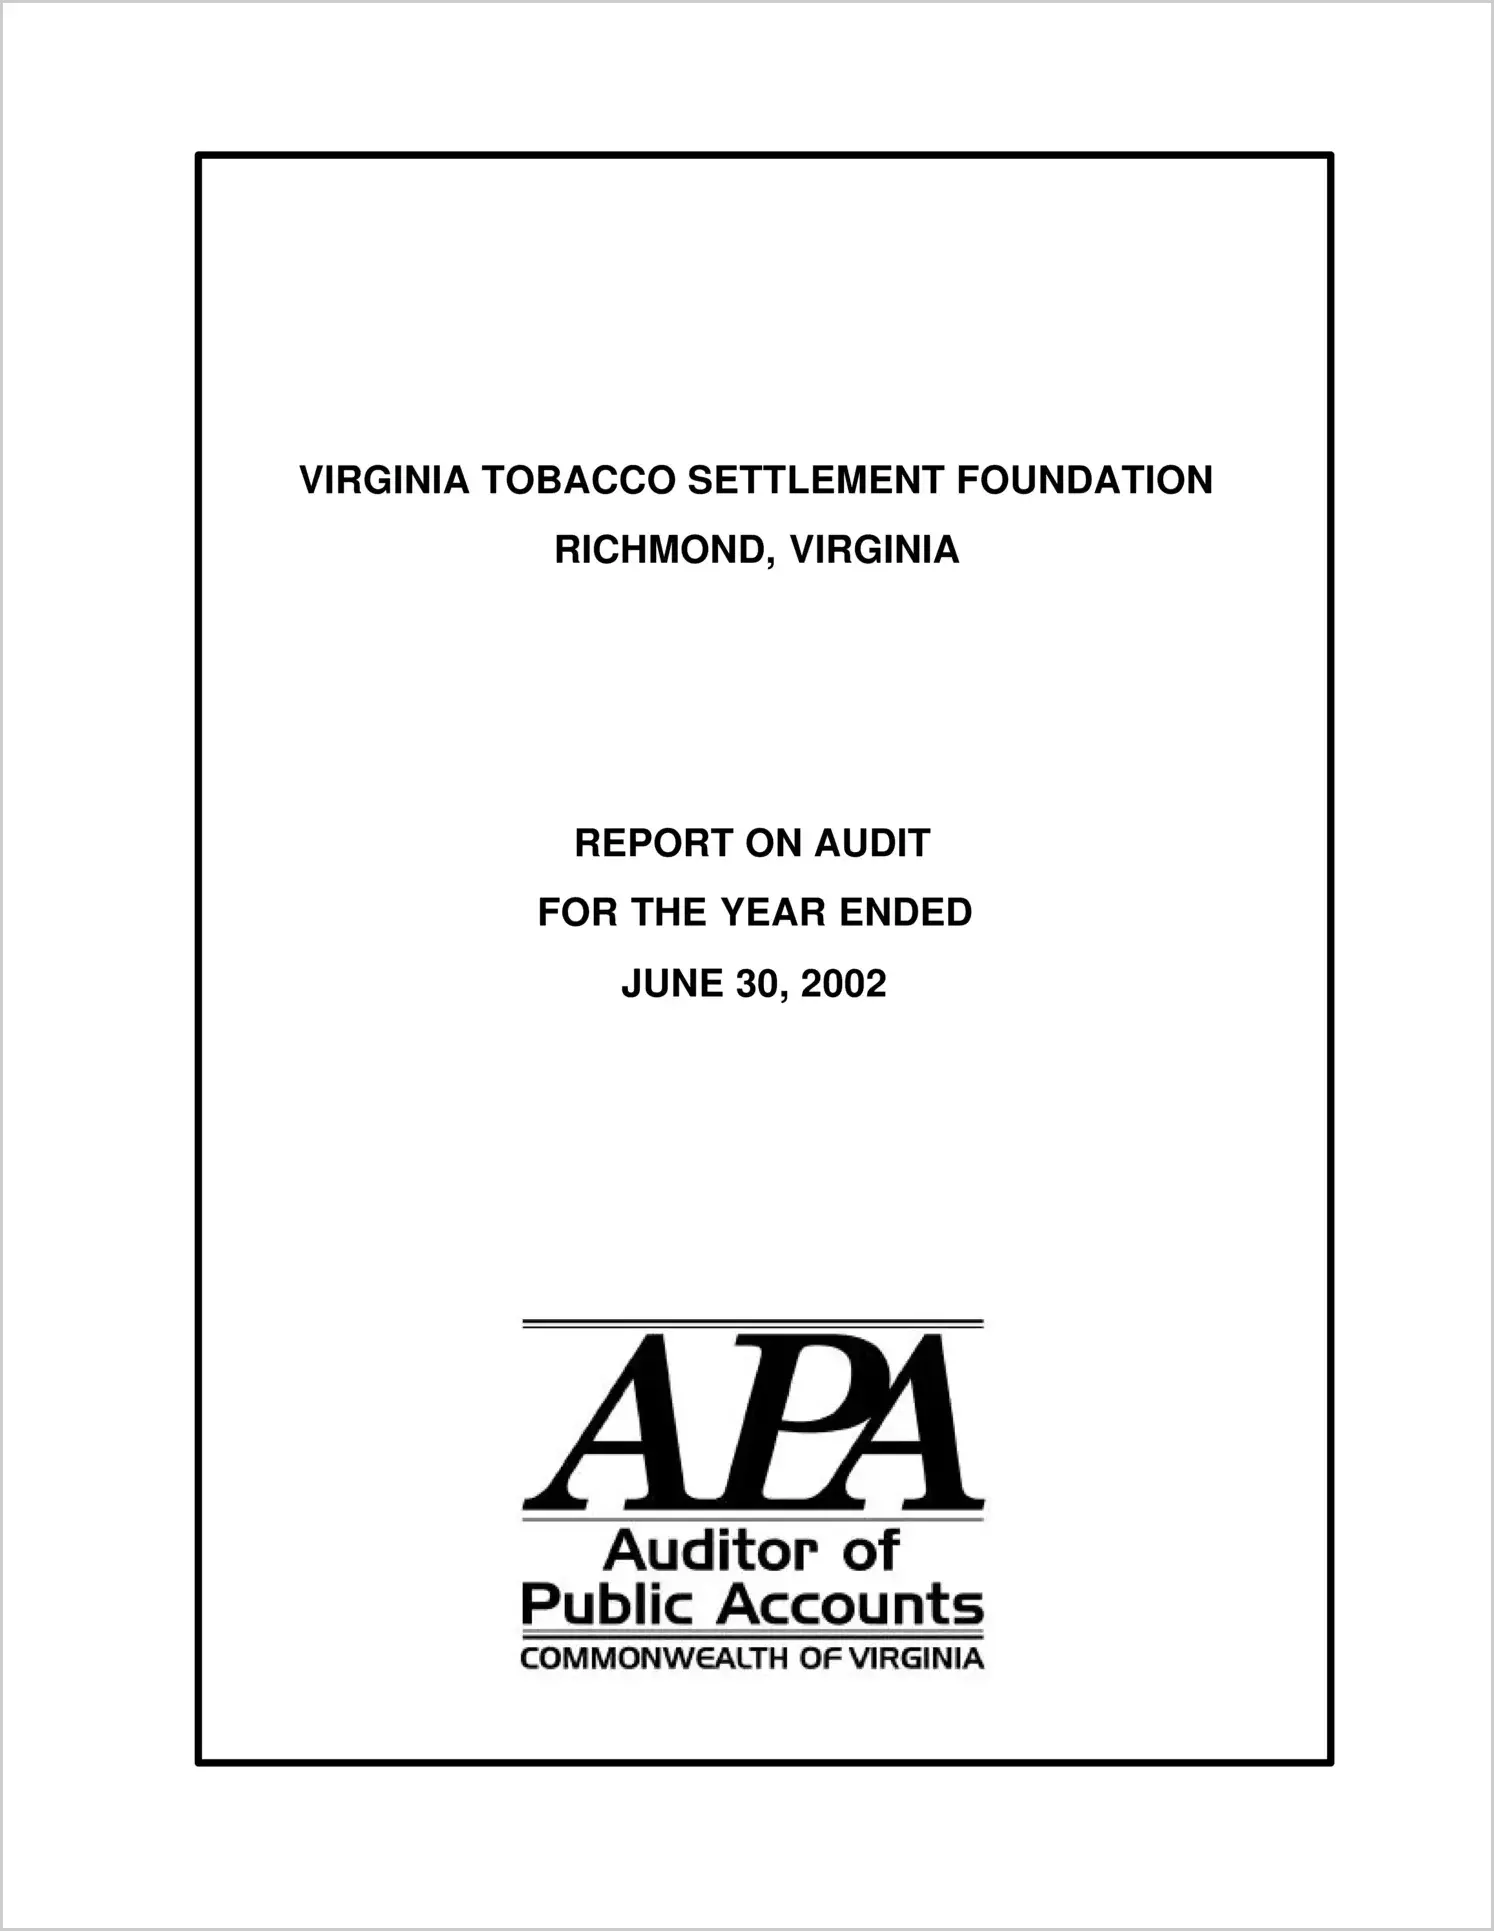 Virginia Tobacco Settlement Foundation for the year ended June 30, 2002